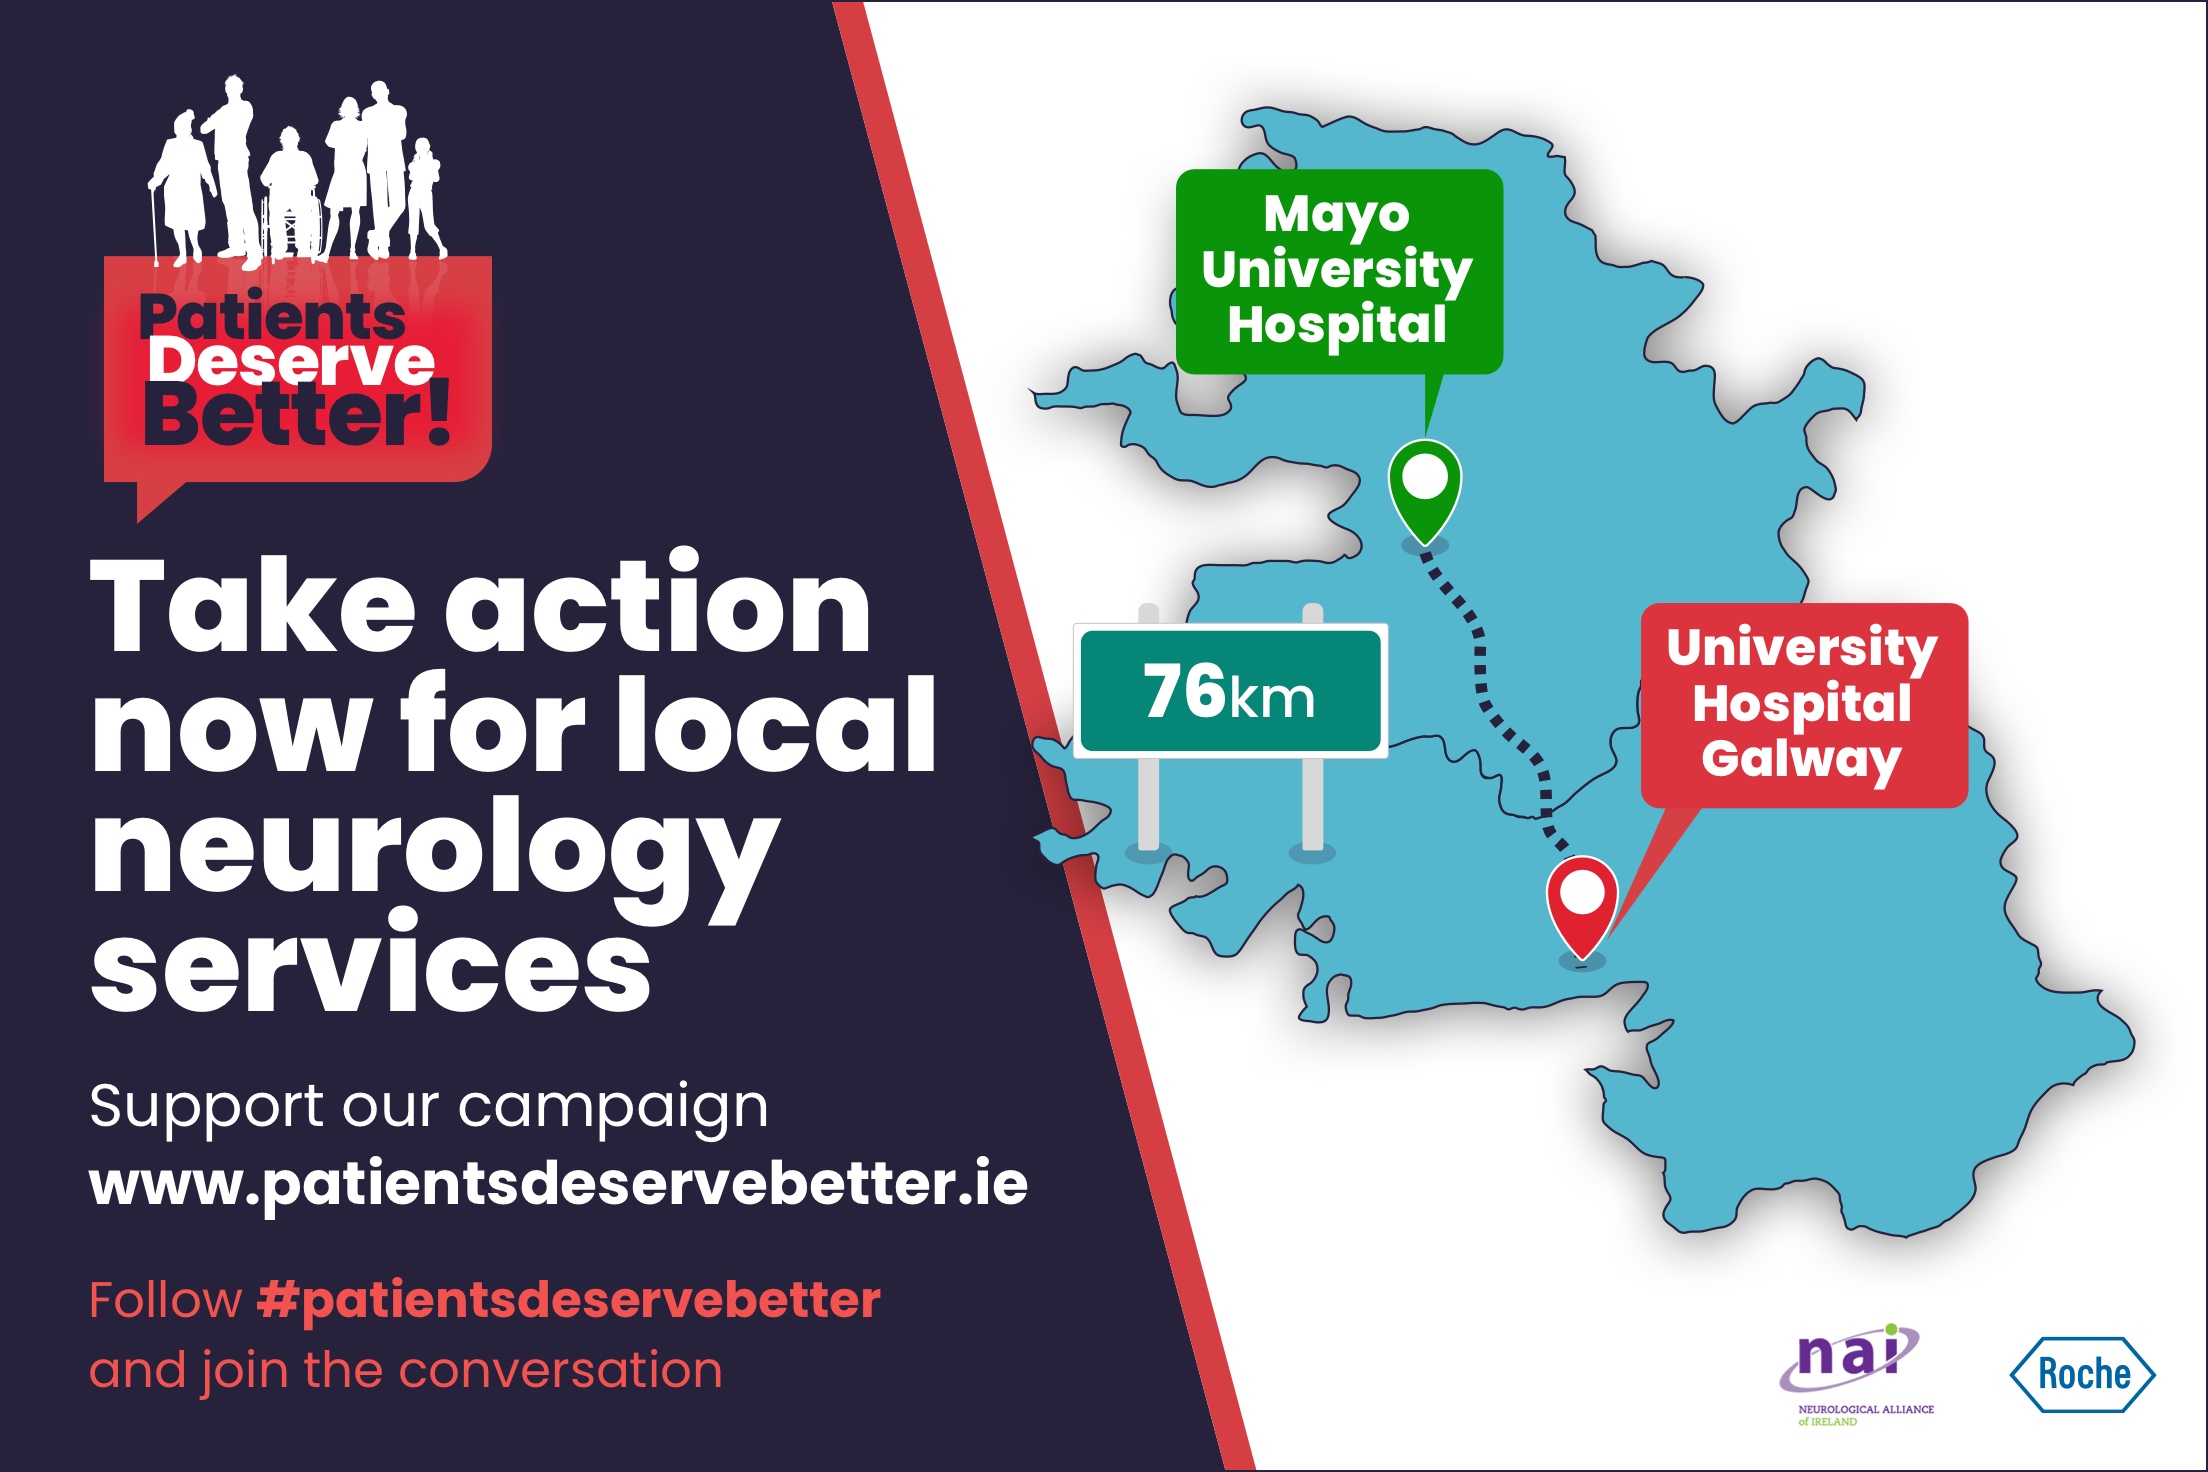 Patients Deserve Better neurology services campaign for 5 regional hospitals throughout Ireland,